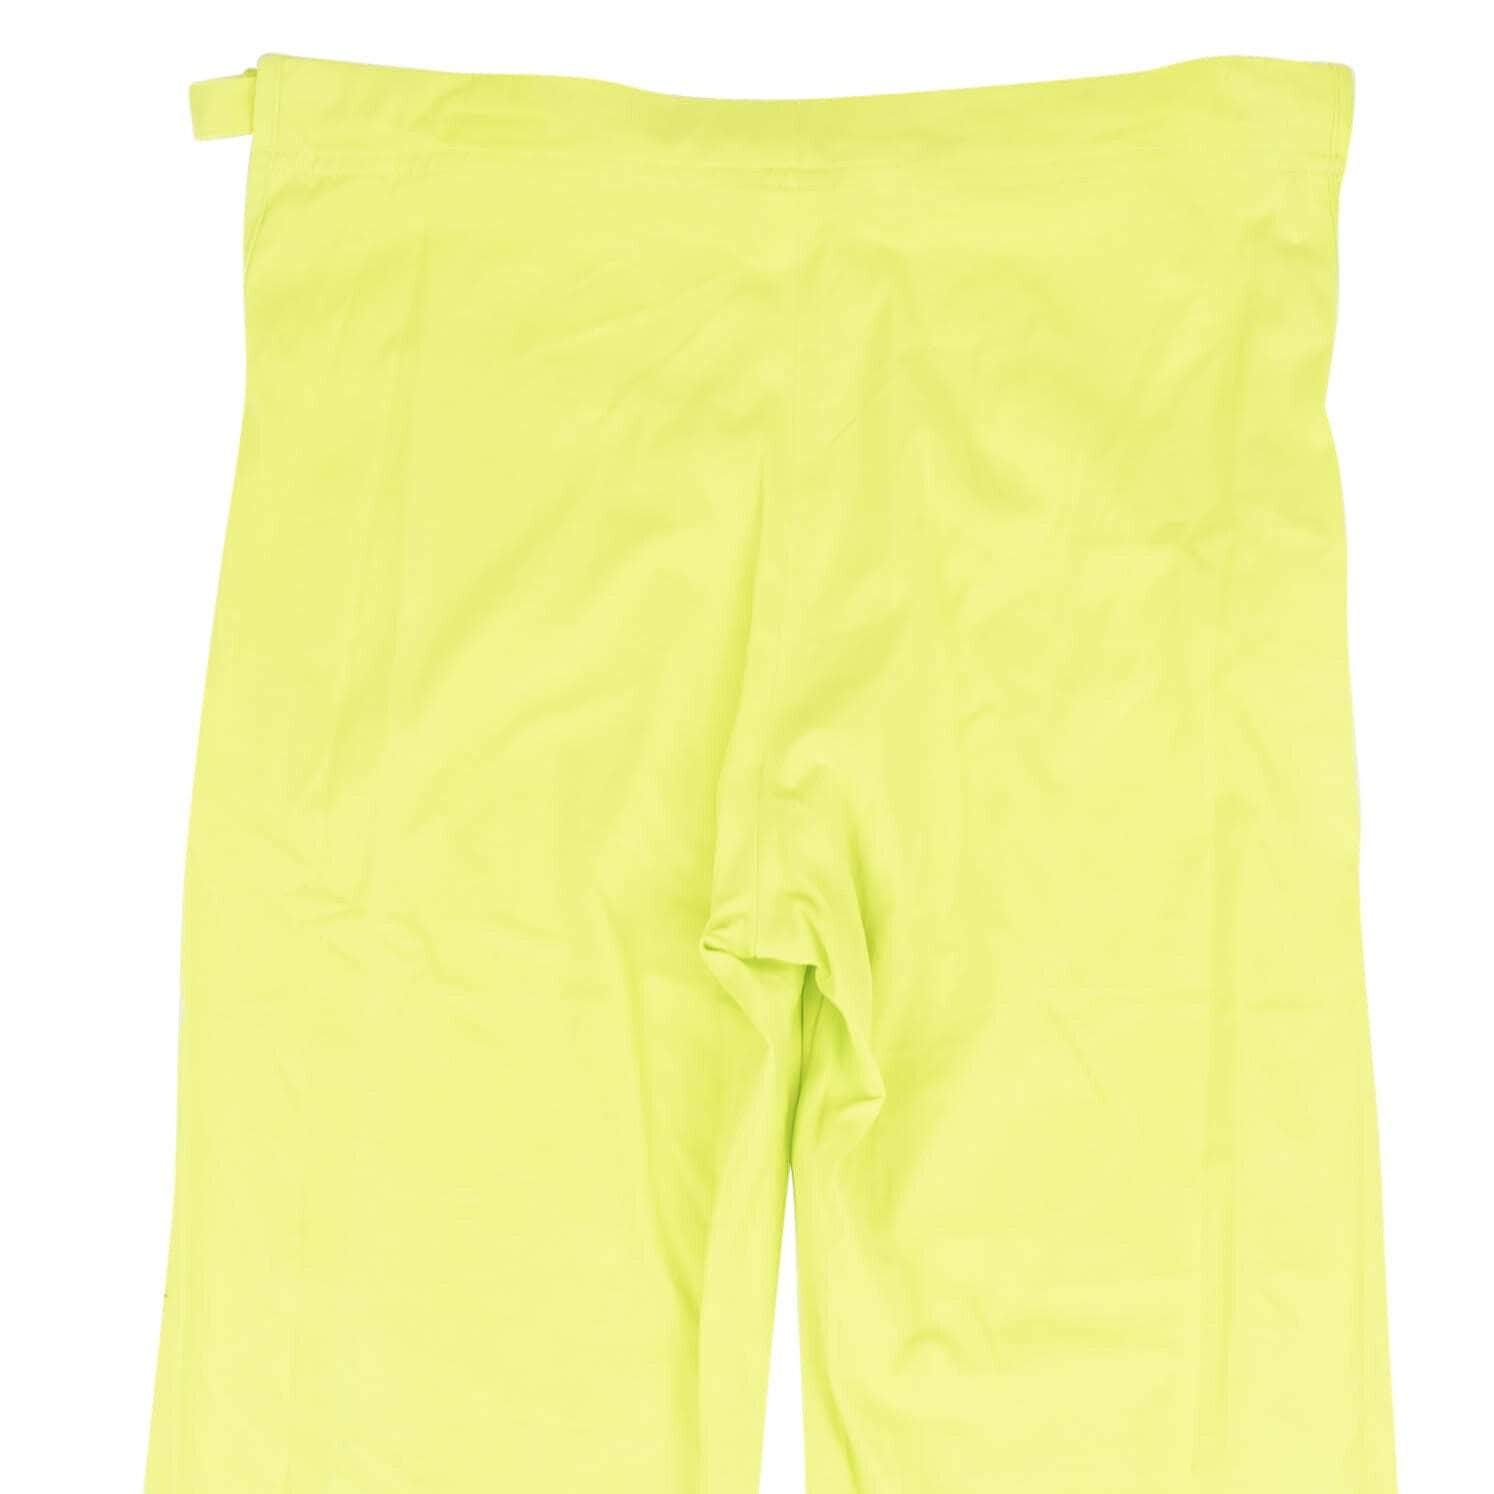 A_Plan_Application a_plan_application, channelenable-all, chicmi, couponcollection, gender-womens, main-clothing, size-s, under-250, womens-straight-pants S Neon Yellow Green Jersey Judo Pants 95-APA-1002/S 95-APA-1002/S